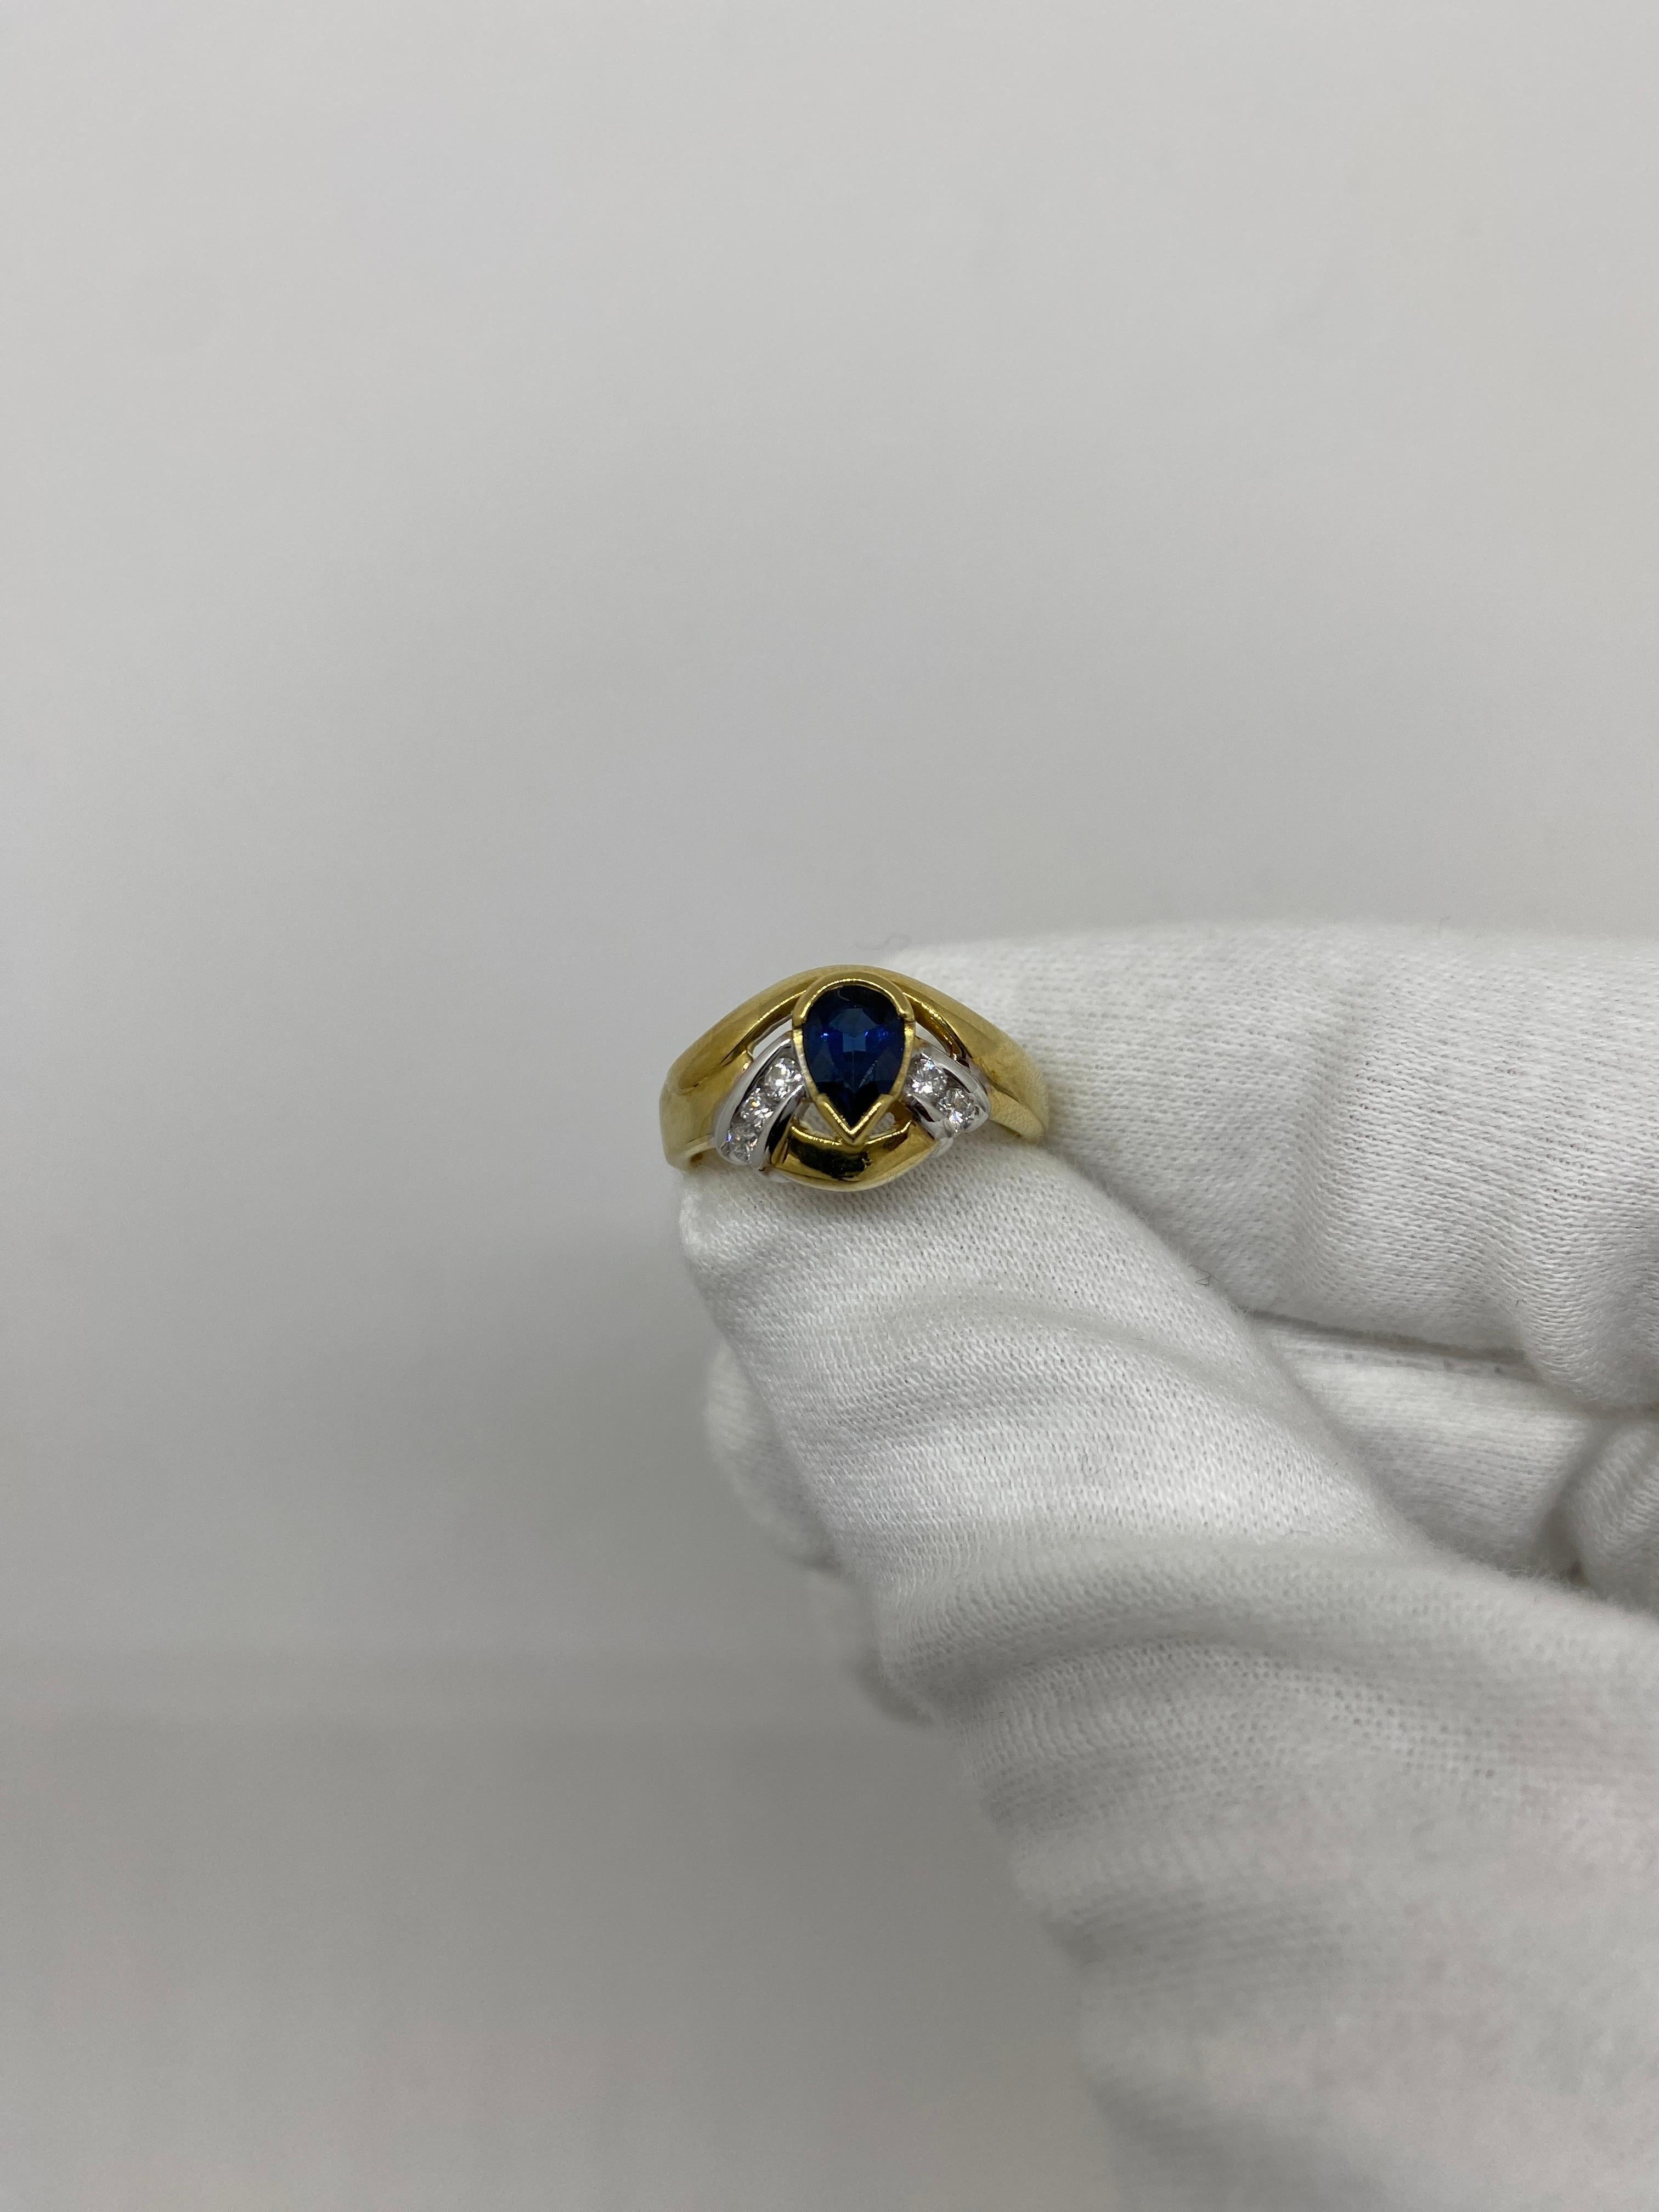 Ring made of 18kt yellow gold with natural sapphire drop for ct .0.79 and brilliant-cut diamonds for ct.0.19 

Welcome to our jewelry collection, where every piece tells a story of timeless elegance and unparalleled craftsmanship. As a family-run